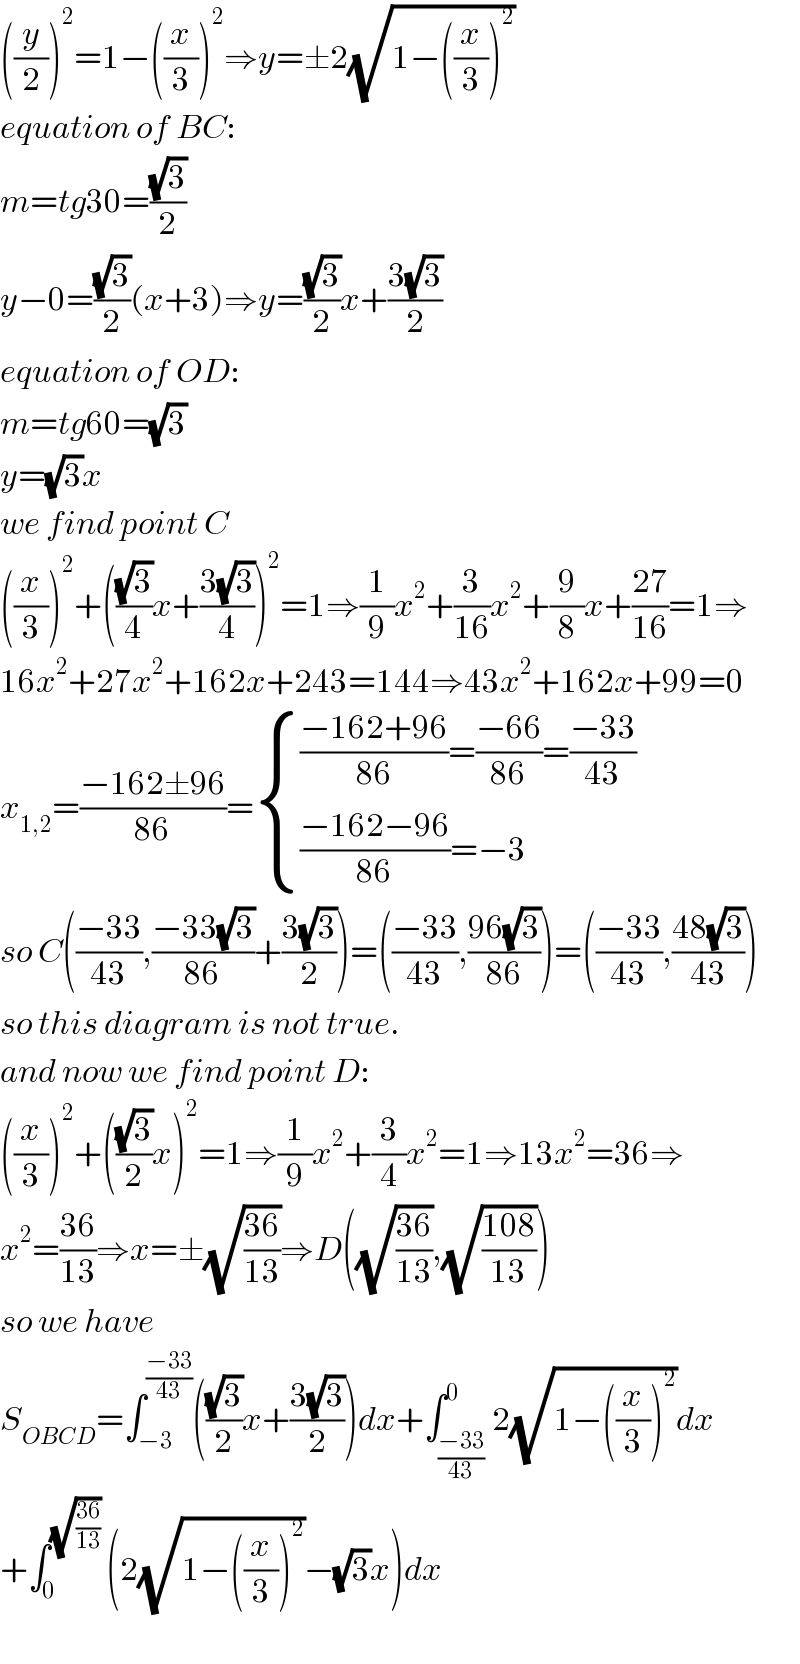 ((y/2))^2 =1−((x/3))^2 ⇒y=±2(√(1−((x/3))^2 ))  equation of BC:  m=tg30=((√3)/2)  y−0=((√3)/2)(x+3)⇒y=((√3)/2)x+((3(√3))/2)  equation of OD:  m=tg60=(√3)  y=(√3)x  we find point C  ((x/3))^2 +(((√3)/4)x+((3(√3))/4))^2 =1⇒(1/9)x^2 +(3/(16))x^2 +(9/8)x+((27)/(16))=1⇒  16x^2 +27x^2 +162x+243=144⇒43x^2 +162x+99=0  x_(1,2) =((−162±96)/(86))= { ((((−162+96)/(86))=((−66)/(86))=((−33)/(43)))),((((−162−96)/(86))=−3)) :}  so C(((−33)/(43)),((−33(√3))/(86))+((3(√3))/2))=(((−33)/(43)),((96(√3))/(86)))=(((−33)/(43)),((48(√3))/(43)))  so this diagram is not true.  and now we find point D:  ((x/3))^2 +(((√3)/2)x)^2 =1⇒(1/9)x^2 +(3/4)x^2 =1⇒13x^2 =36⇒  x^2 =((36)/(13))⇒x=±(√((36)/(13)))⇒D((√((36)/(13))),(√((108)/(13))))  so we have  S_(OBCD) =∫_(−3) ^((−33)/(43)) (((√3)/2)x+((3(√3))/2))dx+∫_((−33)/(43)) ^0 2(√(1−((x/3))^2 ))dx  +∫_0 ^(√((36)/(13)))  (2(√(1−((x/3))^2 ))−(√3)x)dx    